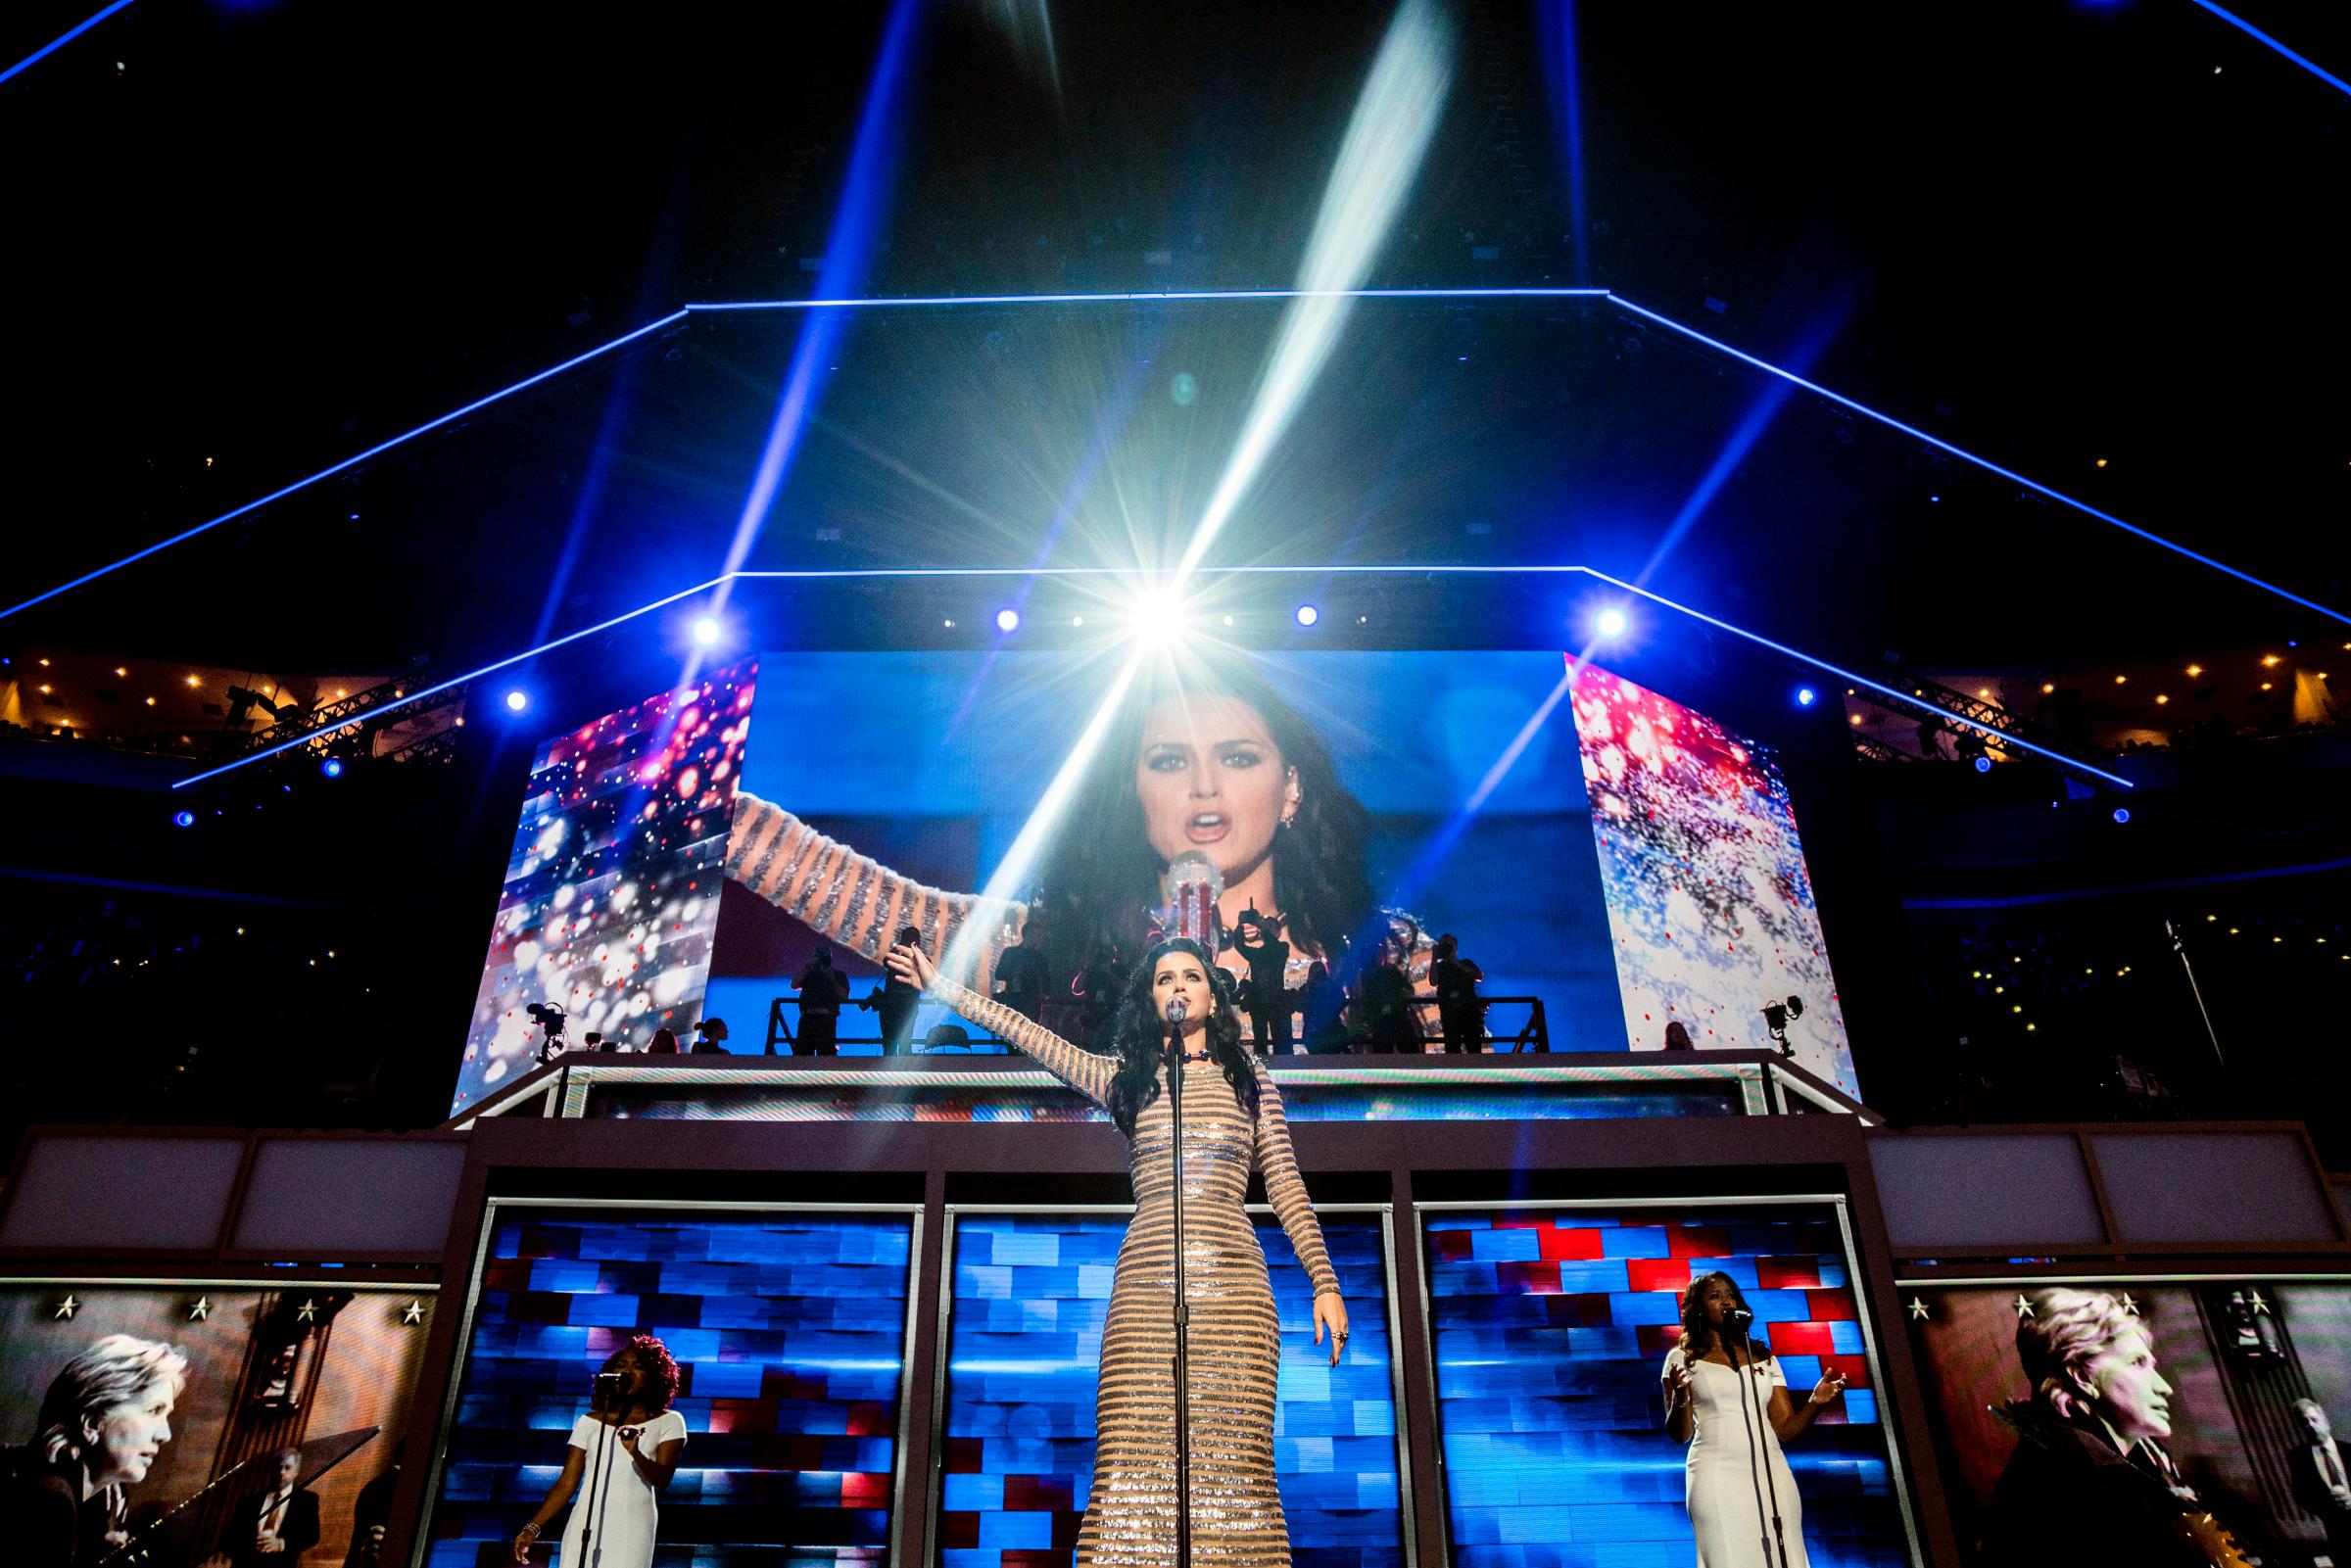 Katy Perry performs at the Democratic National Convention in Philadelphia on July 28, 2016.